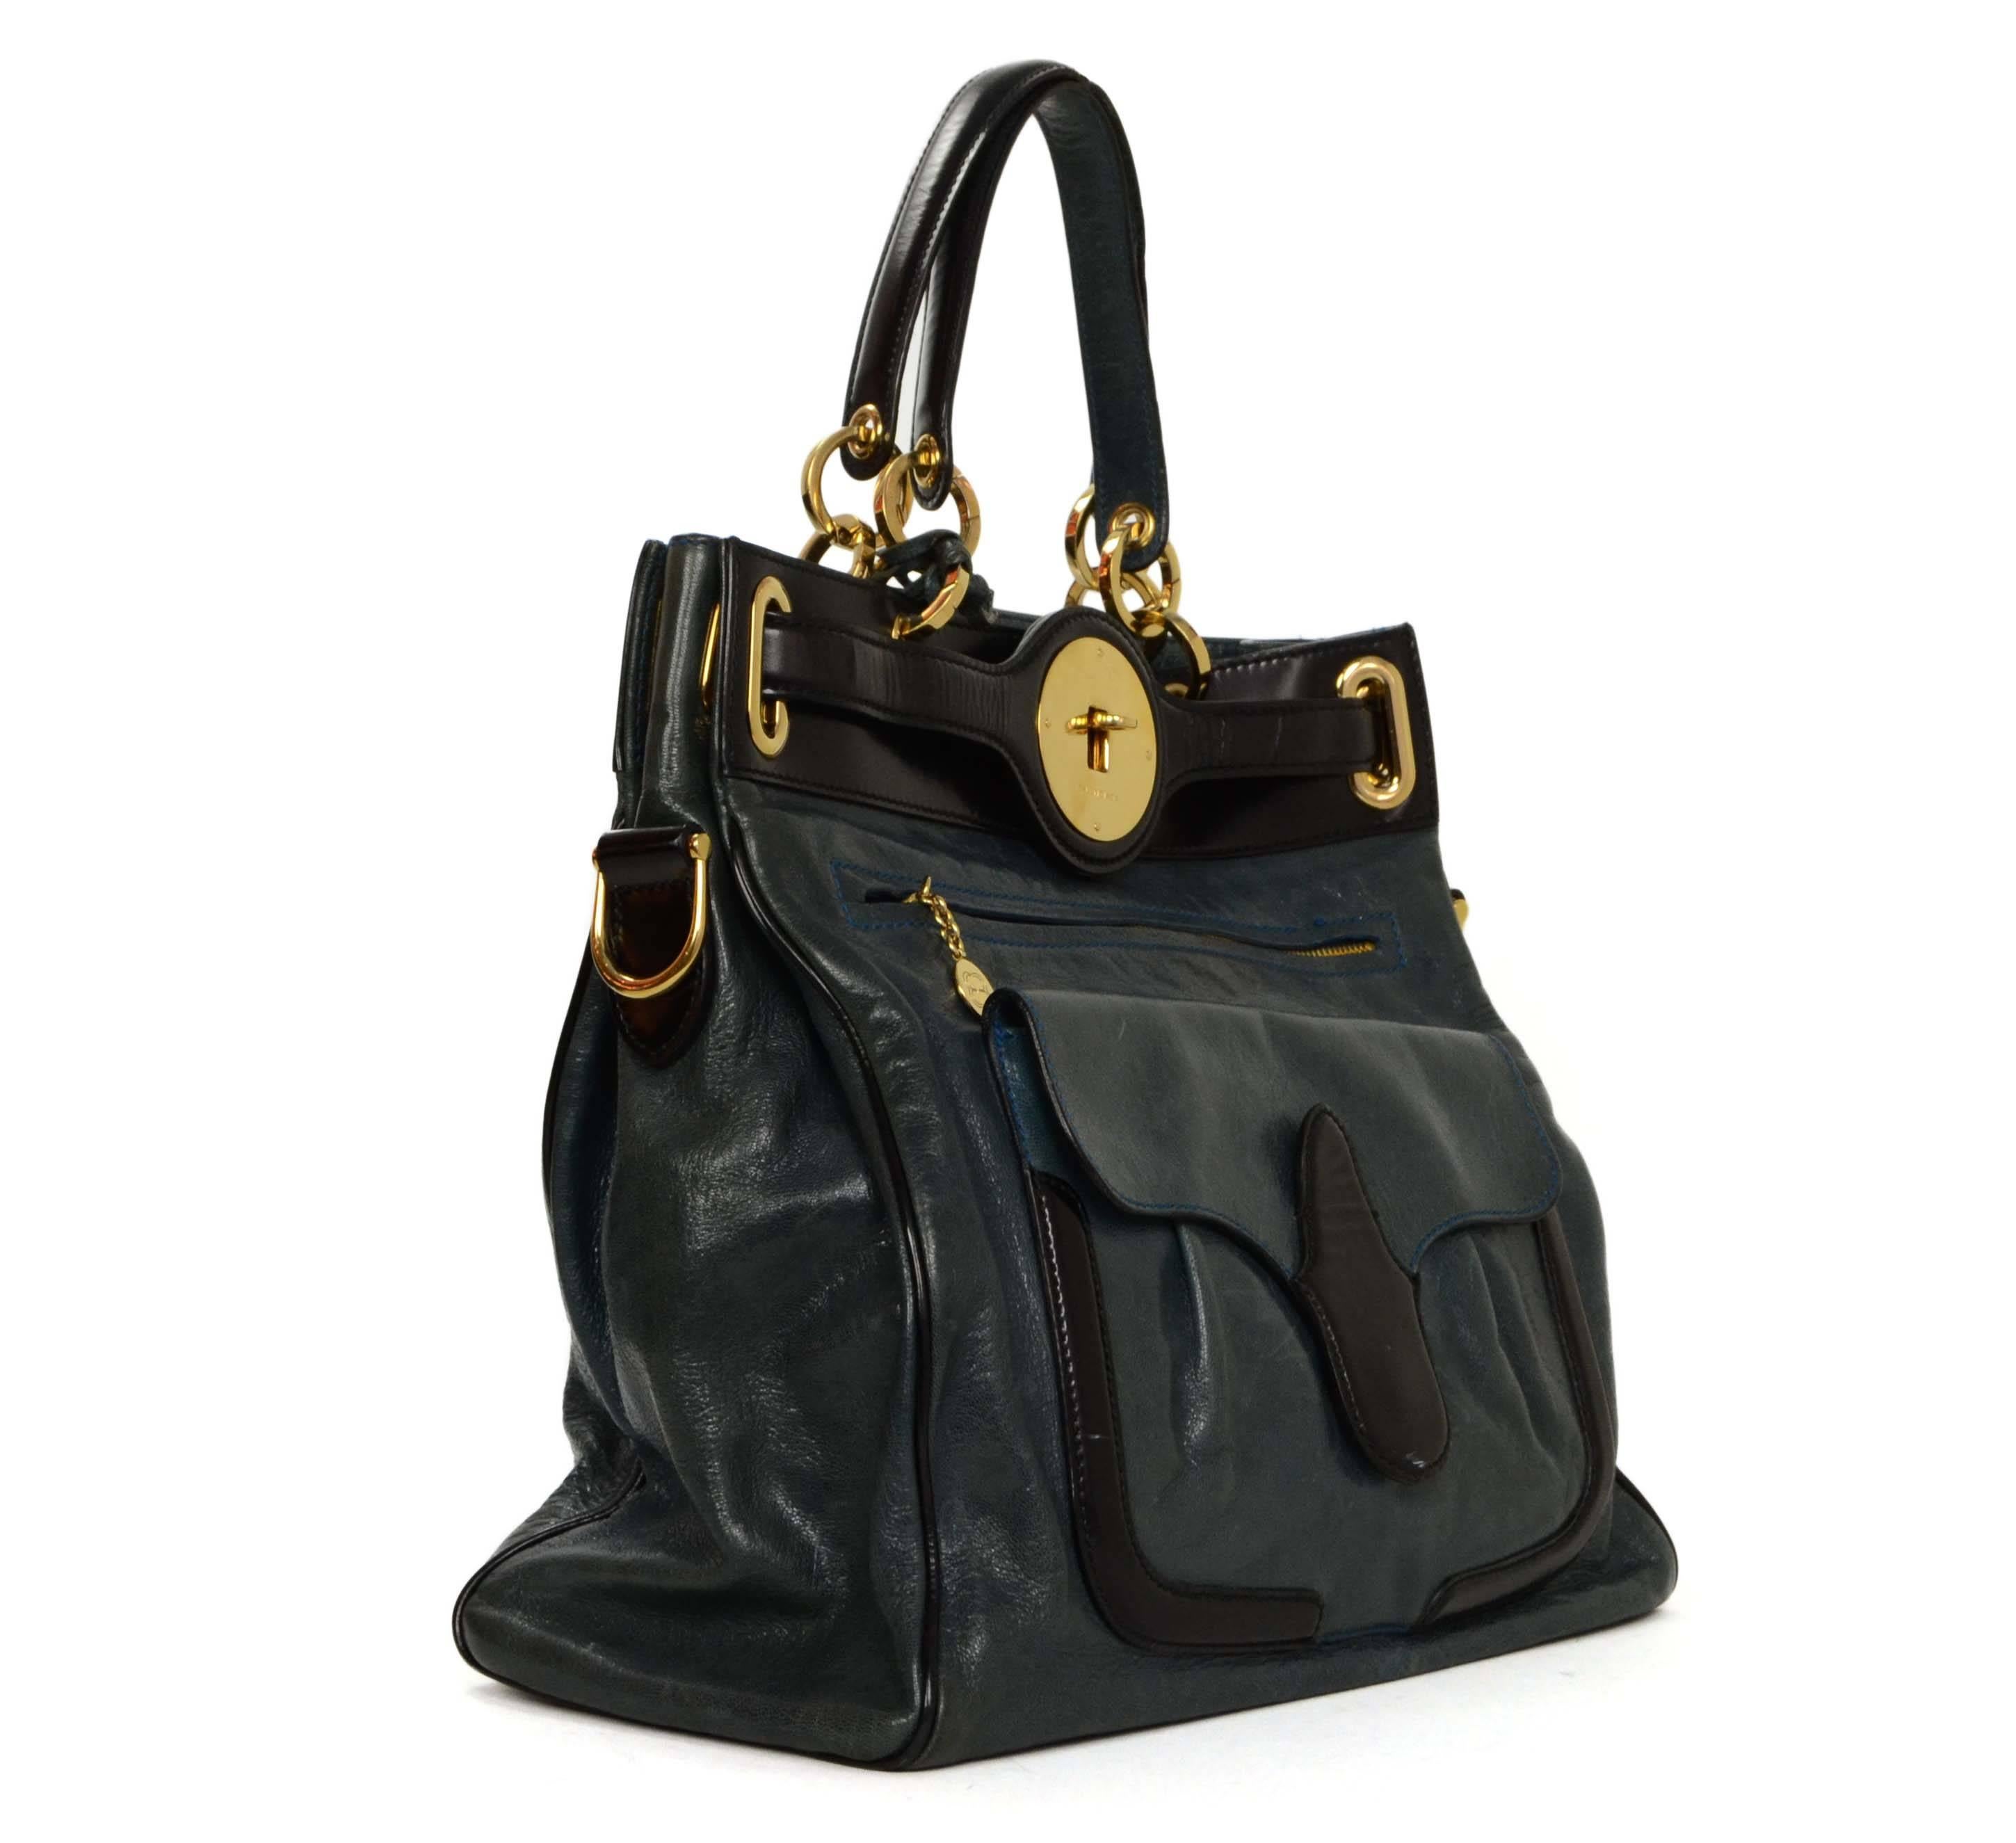 Balenciaga Blue & Black Leather 'Moon' Bag 
Features bright blue contrast stitching
Made In: Italy
Color: Black and blue
Hardware: Goldtone
Materials: Leather
Lining: Black canvas
Closure/Opening: Leather straps with twist lock